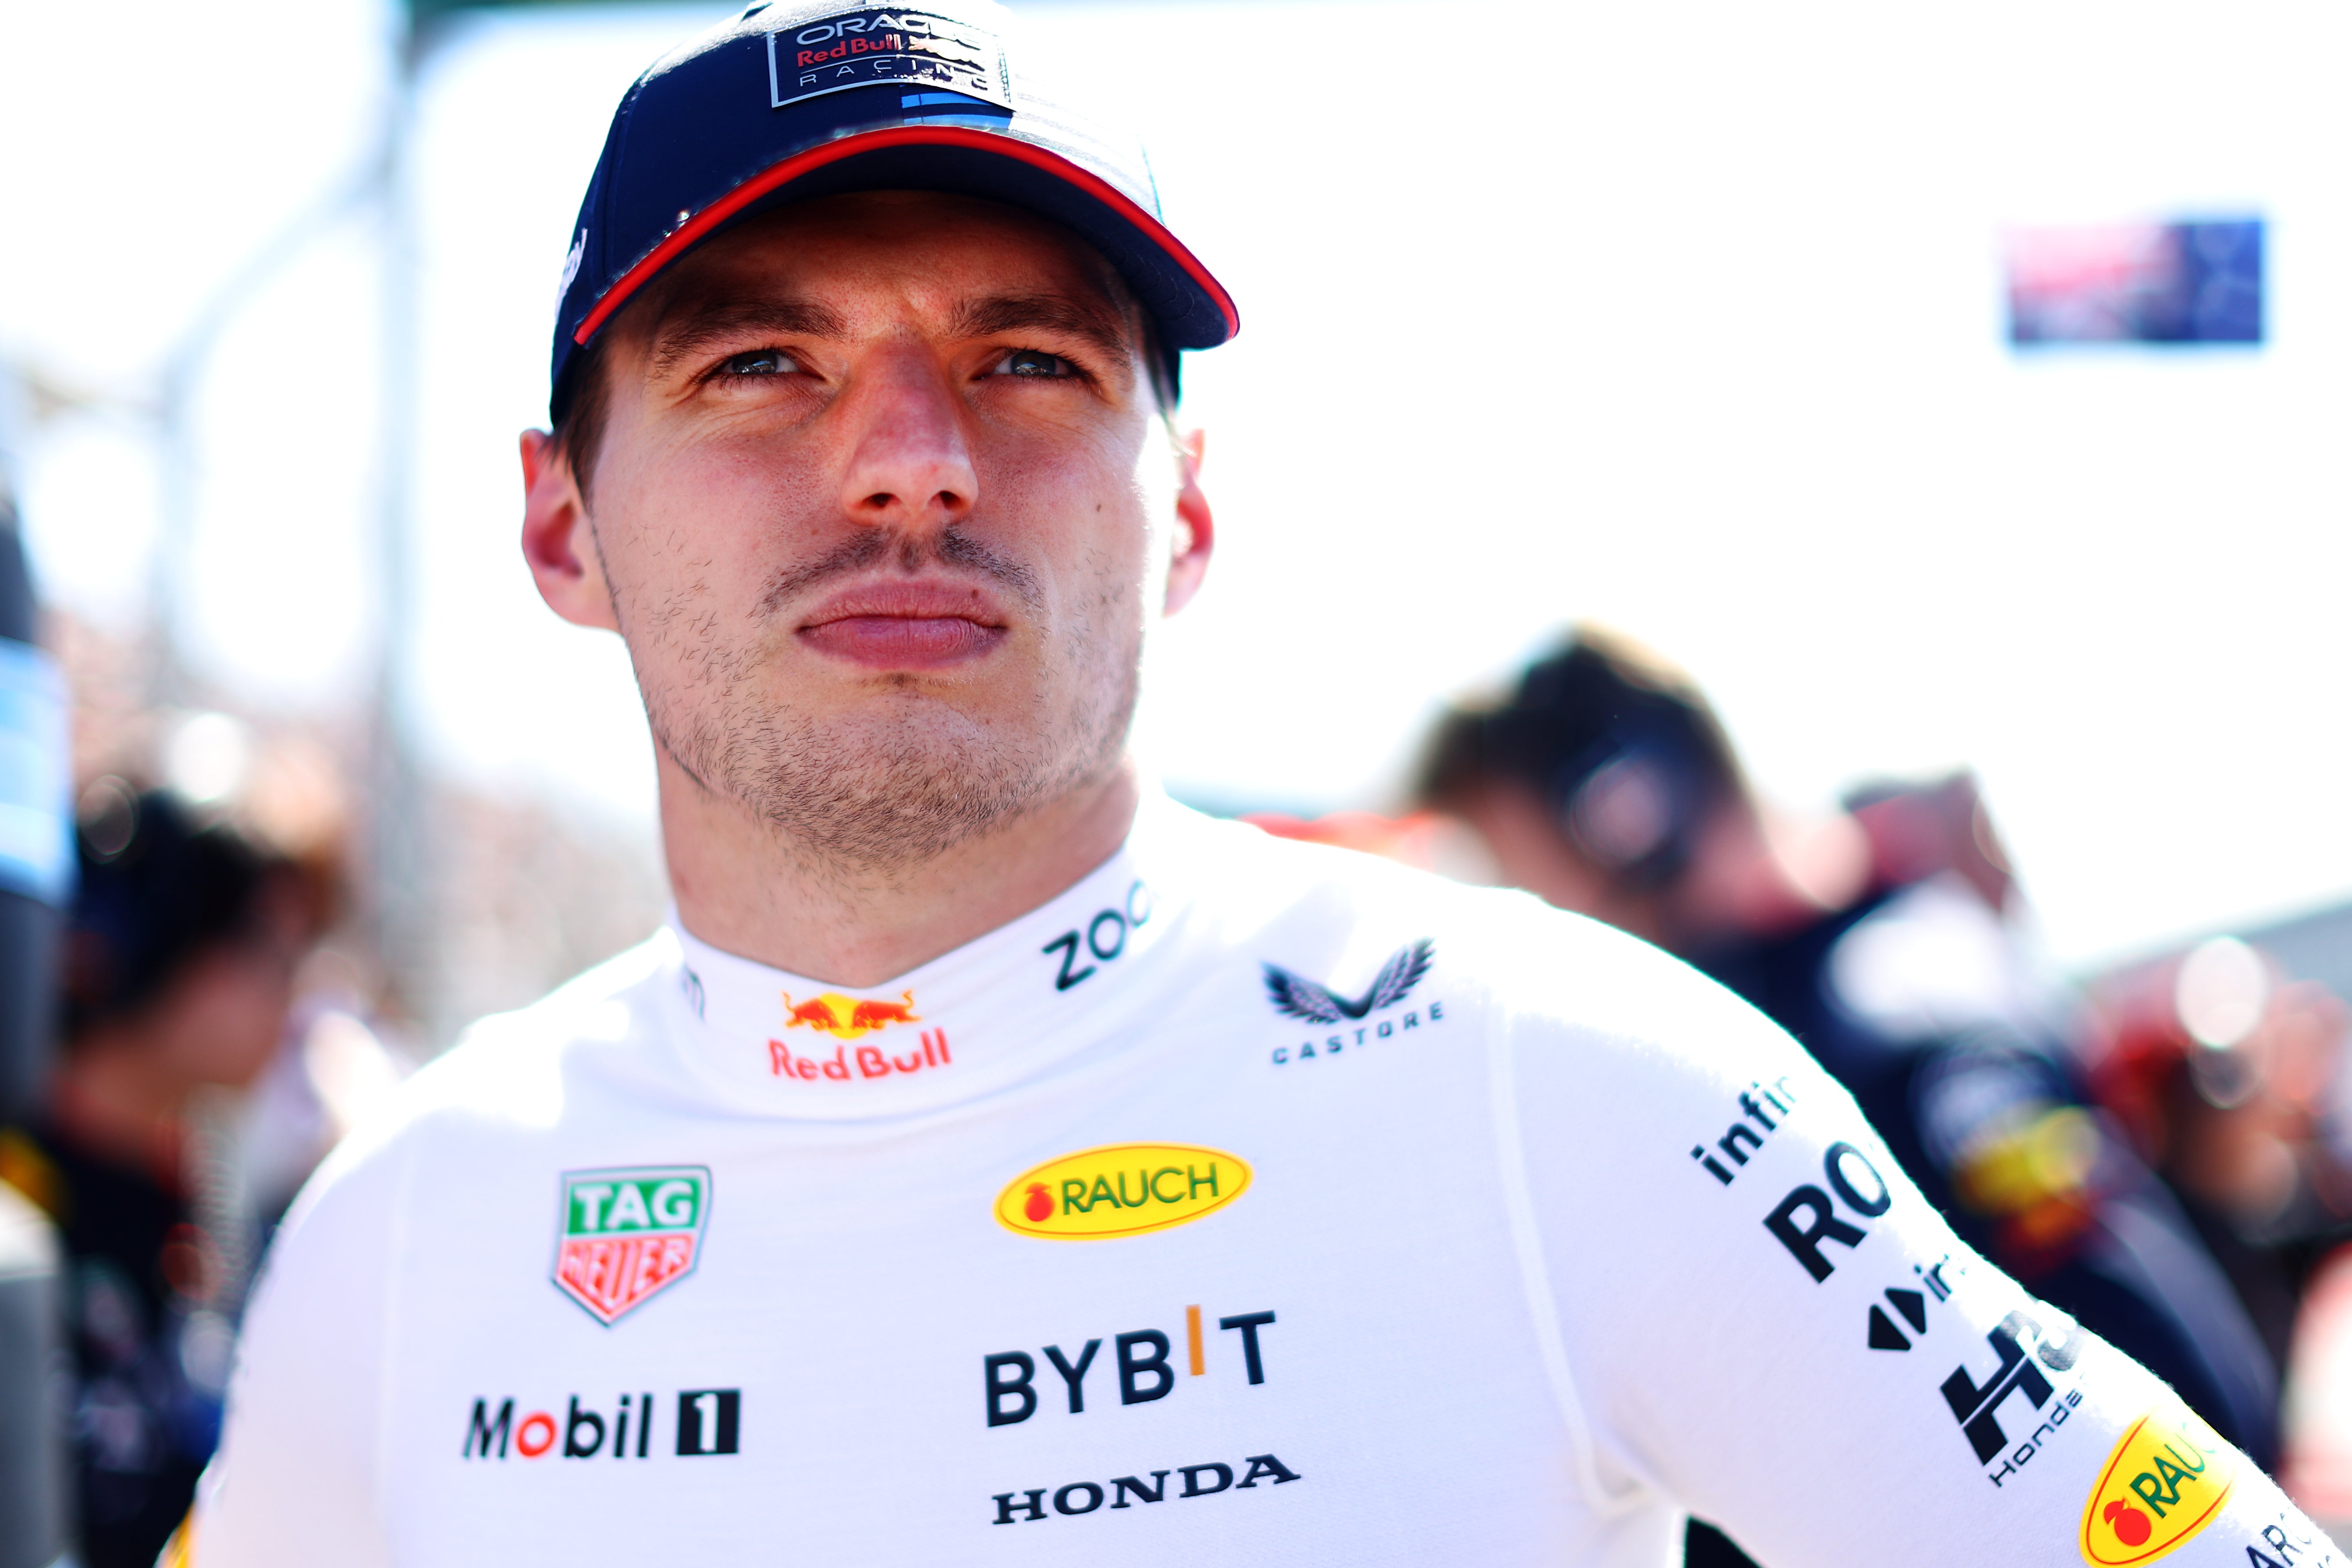 Max Verstappen was fuming after retiring from the Australian Grand Prix